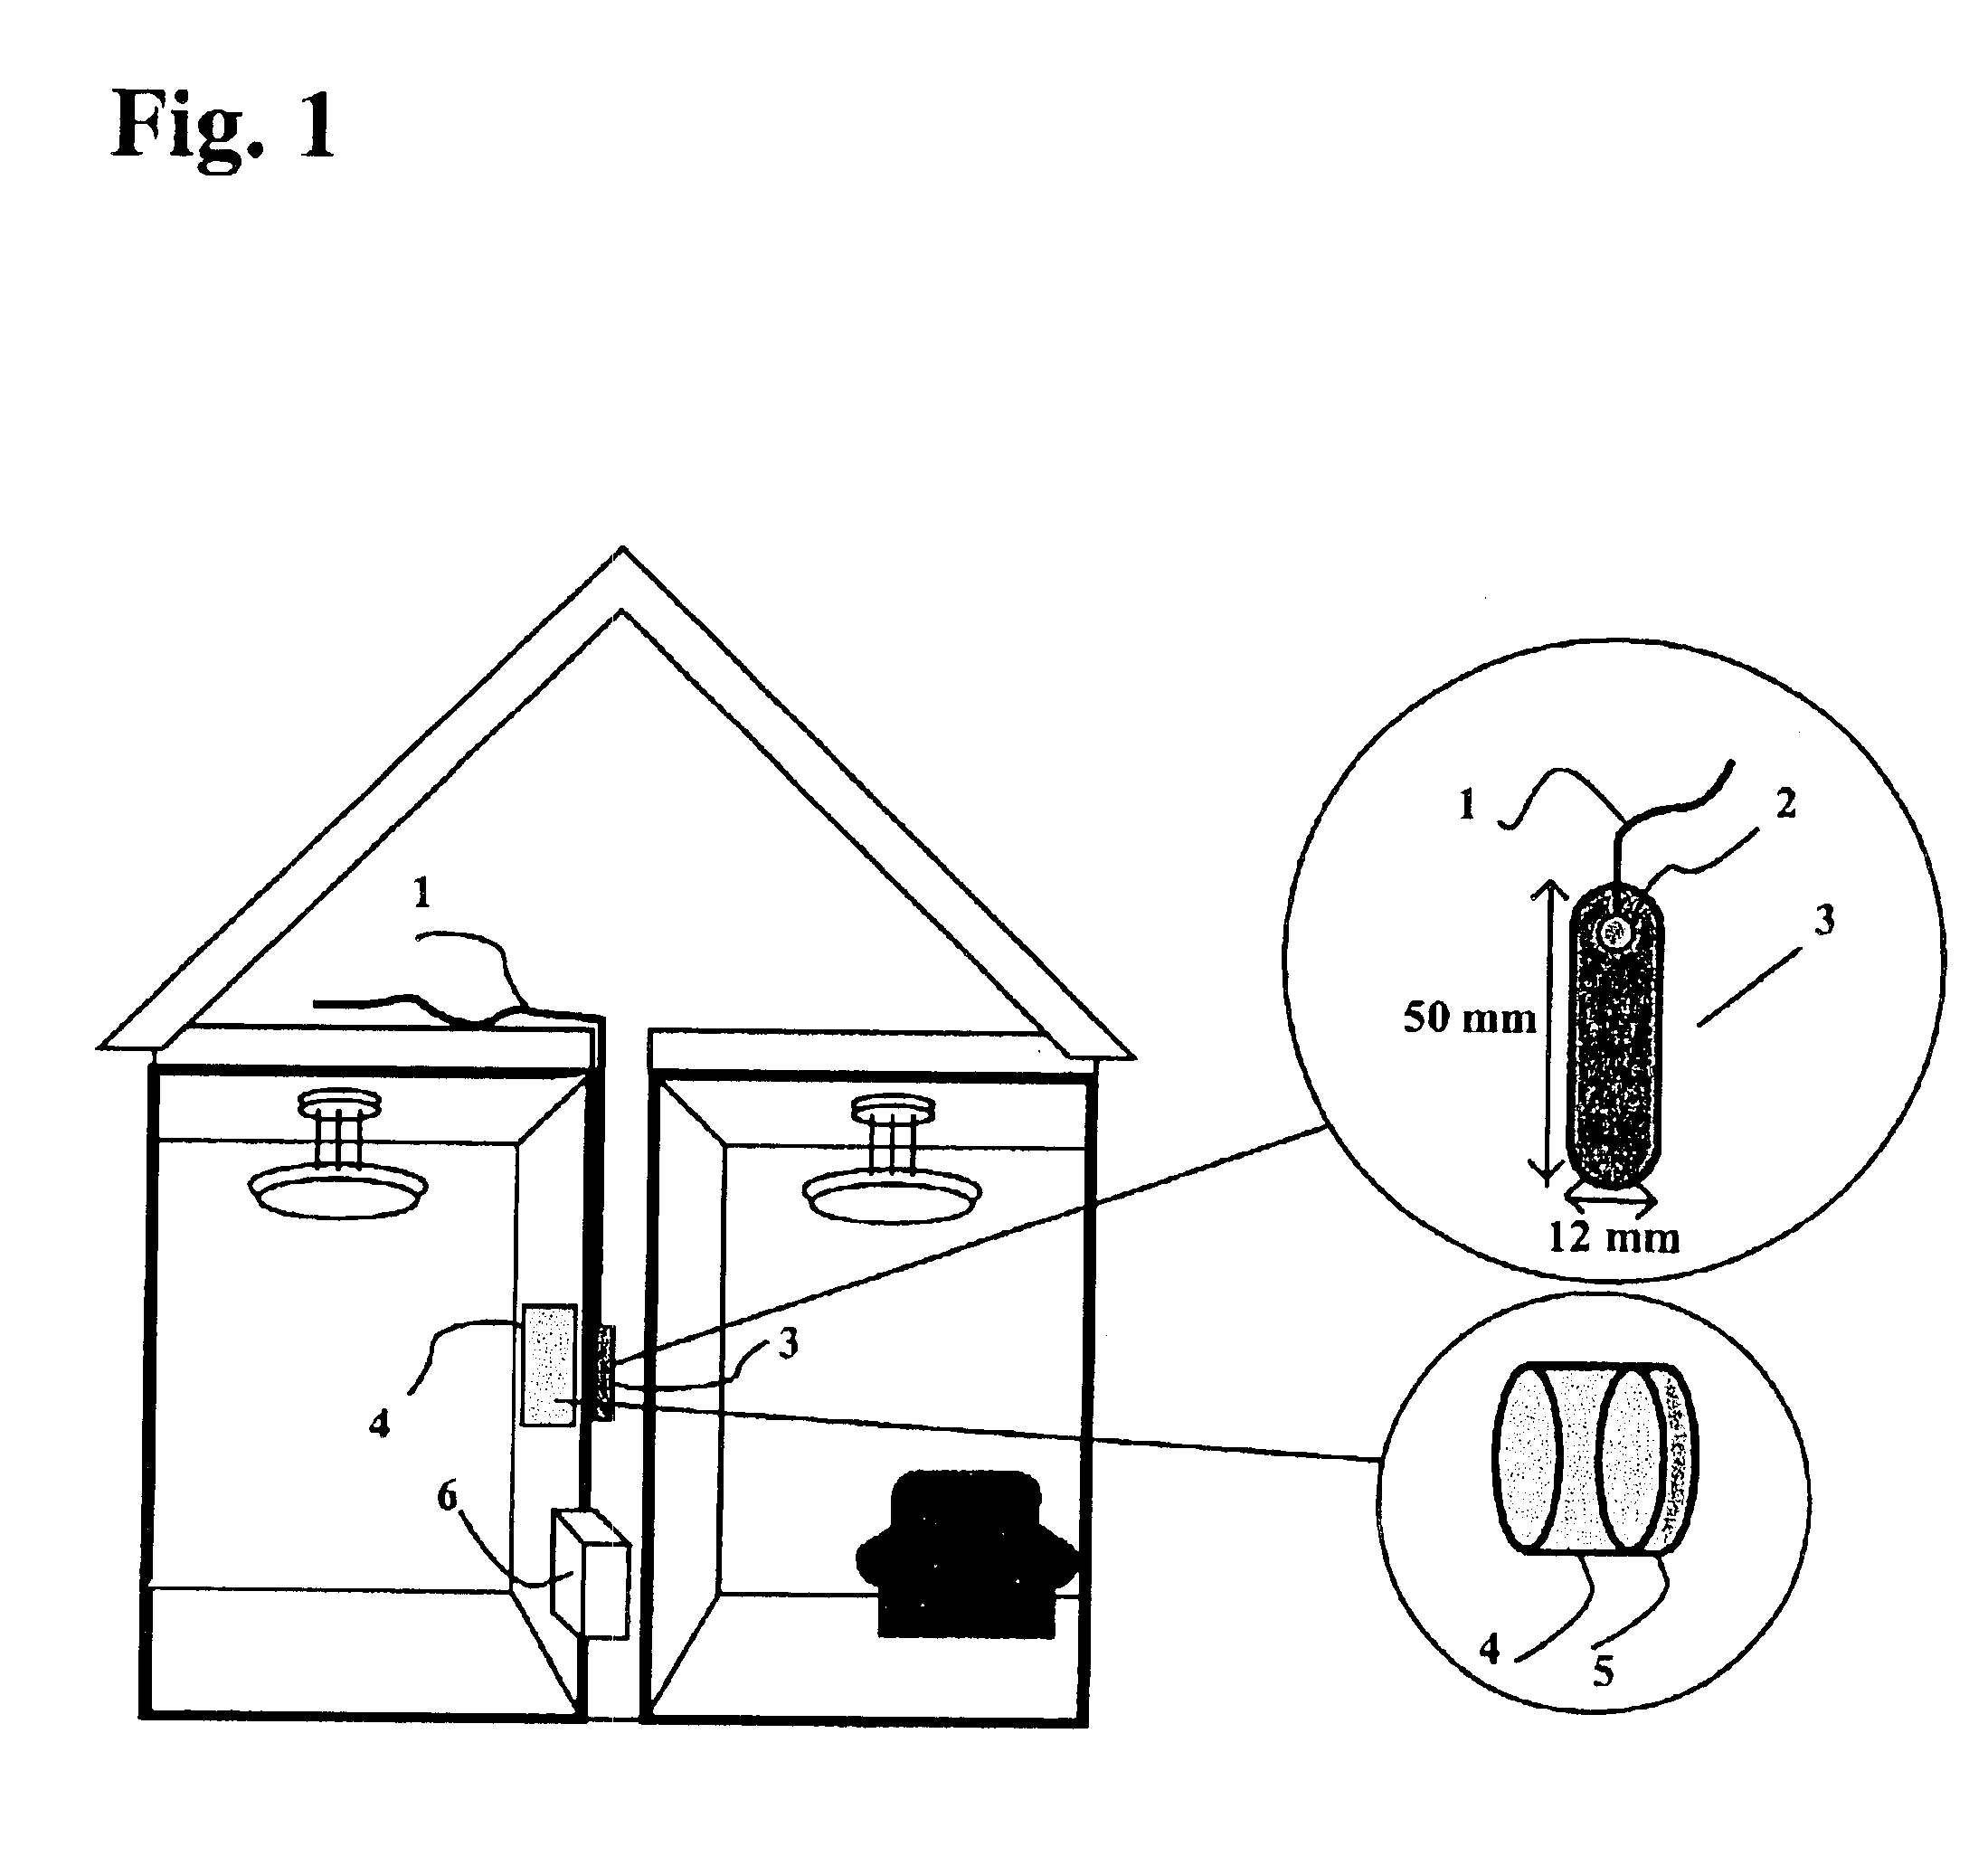 Apparatus for fishing telecommunication or electrical wires, optical cables or conduit behind walls